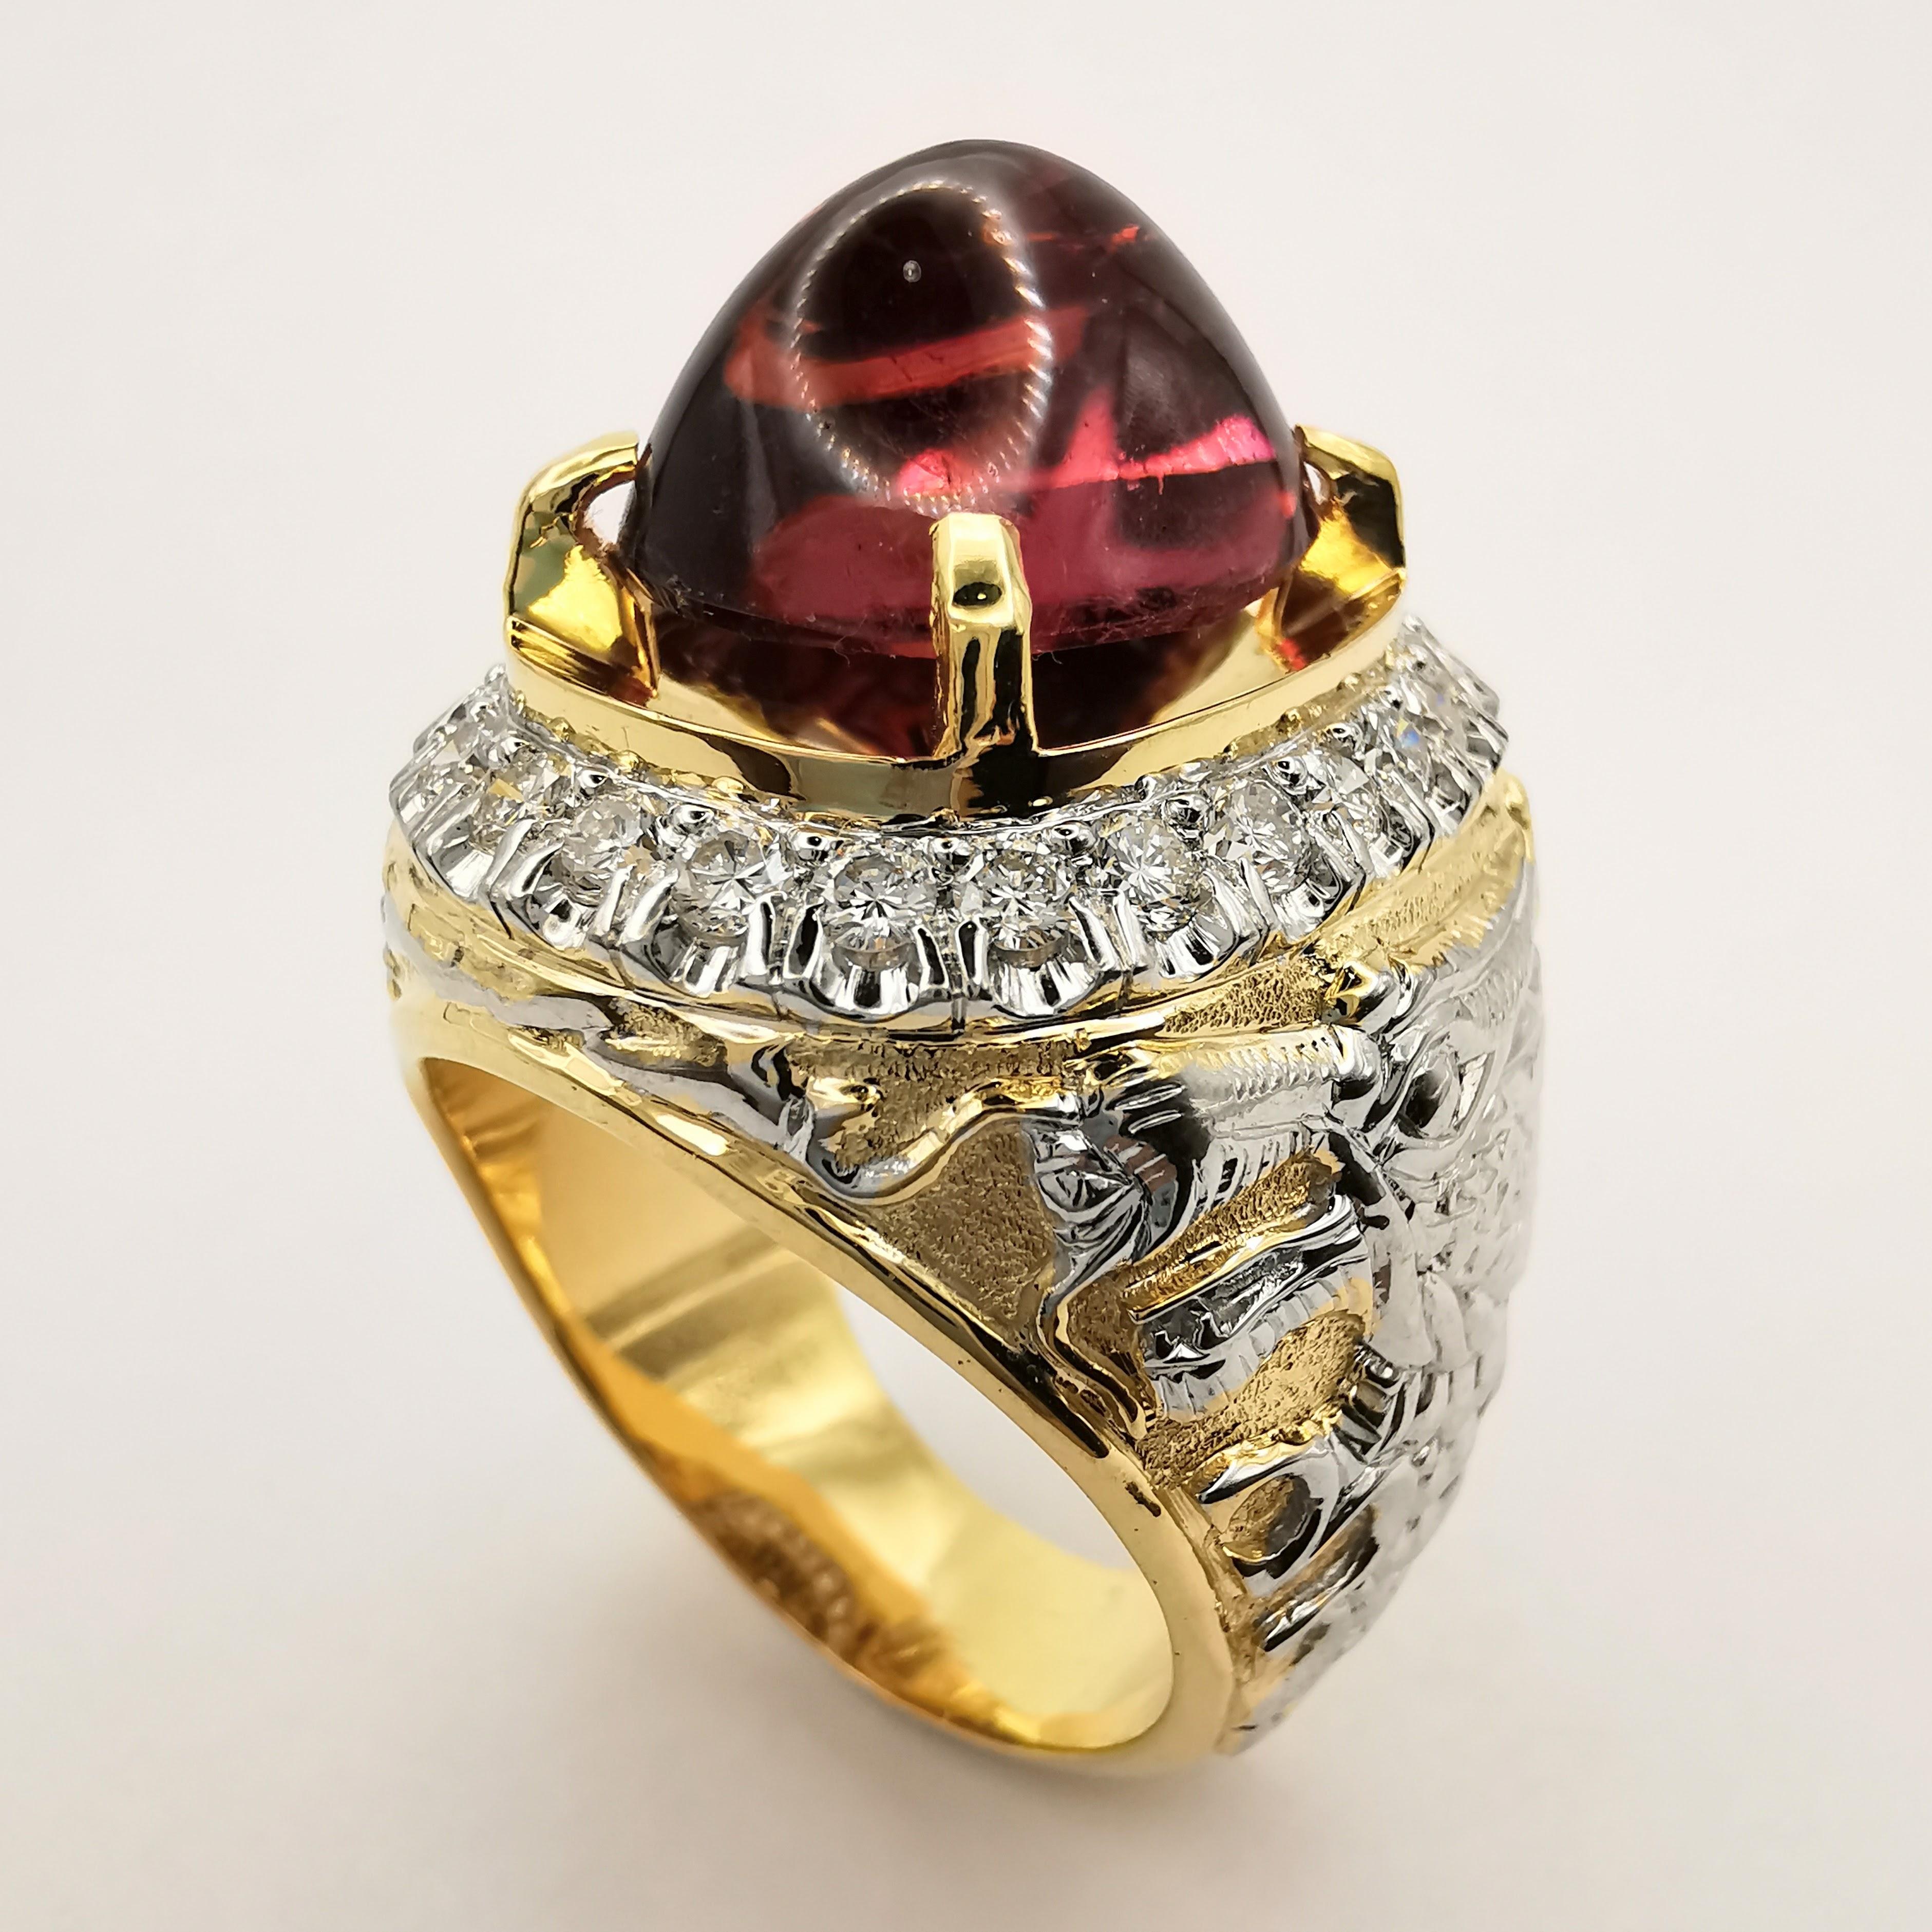 Vintage Dragon 10.2ct Cabochon Pink Tourmaline Diamond Men's Ring in 18K Gold For Sale 1